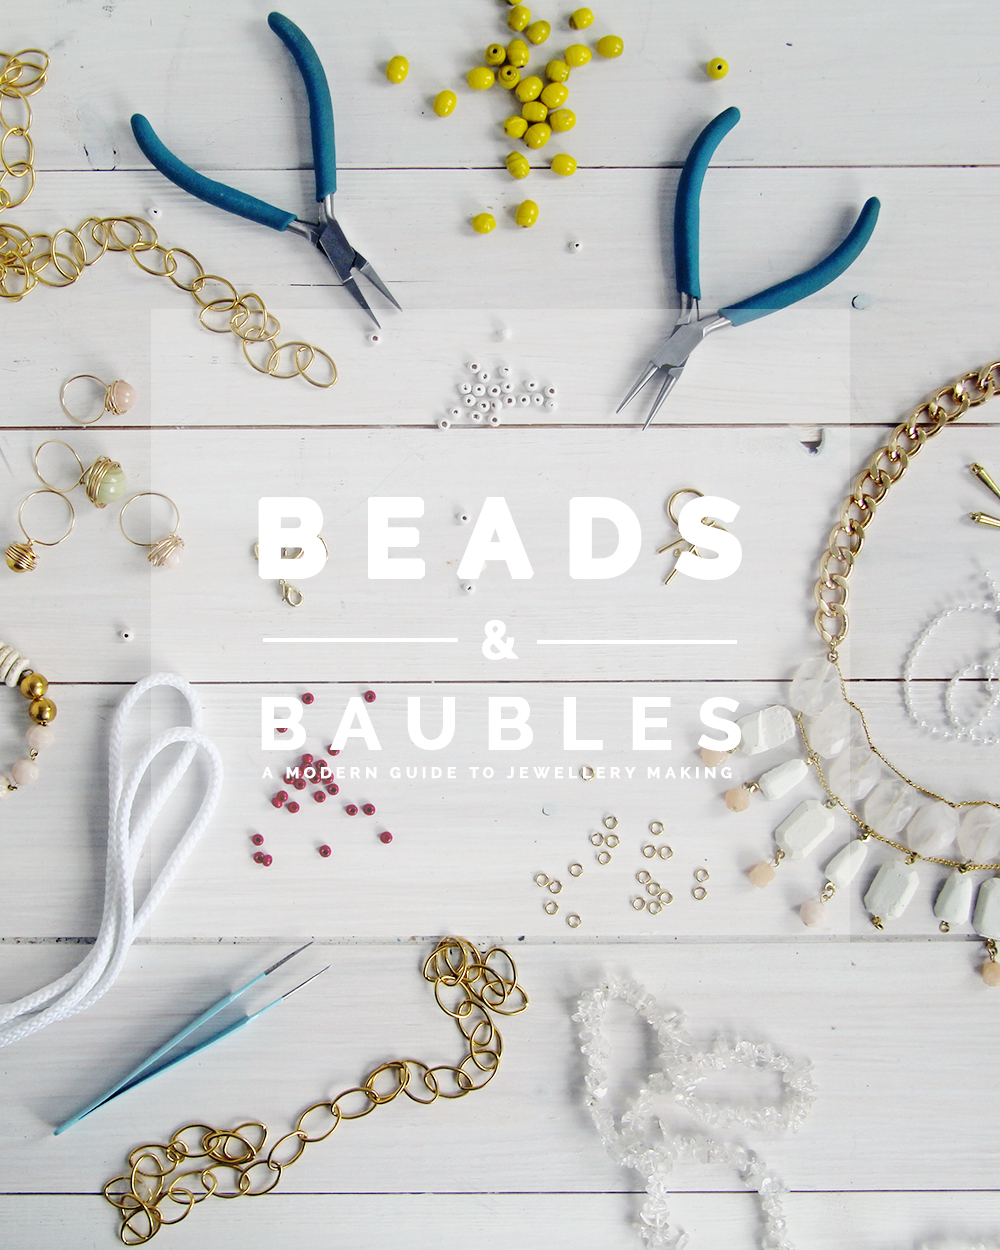 http://fallfordiy.com/wp-content/uploads/2014/10/Beads-and-Baubles-Book-Cover-blog.jpg